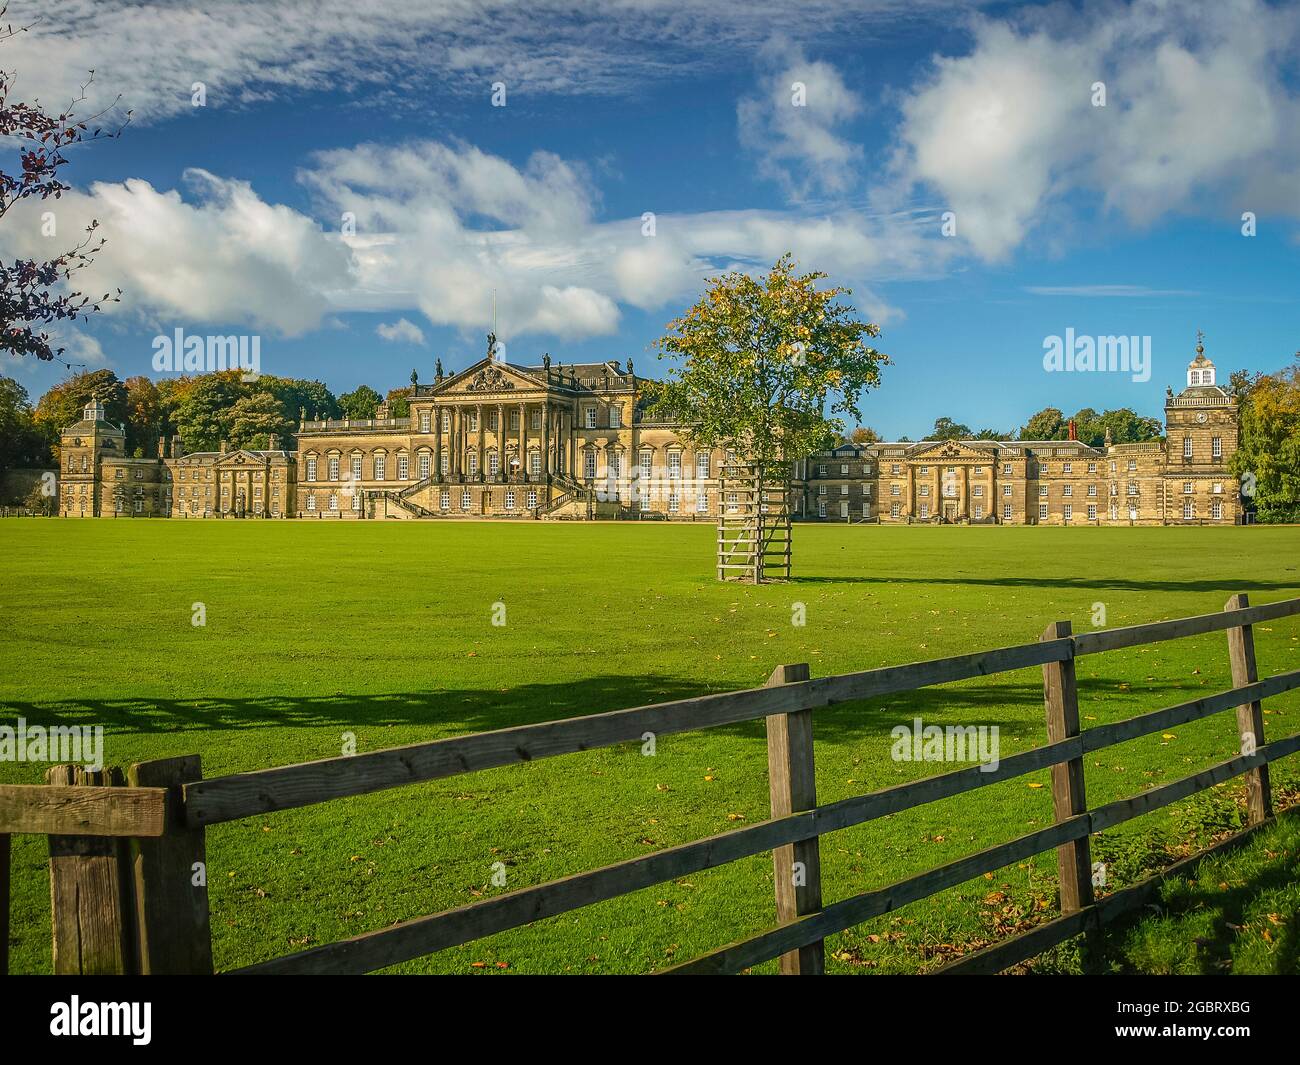 Eastern façade of Wentworth Woodhouse country house, a Grade 1 listed building, in the village of Wentworth, South Yorkshire, England, UK. Late Summer. Stock Photo